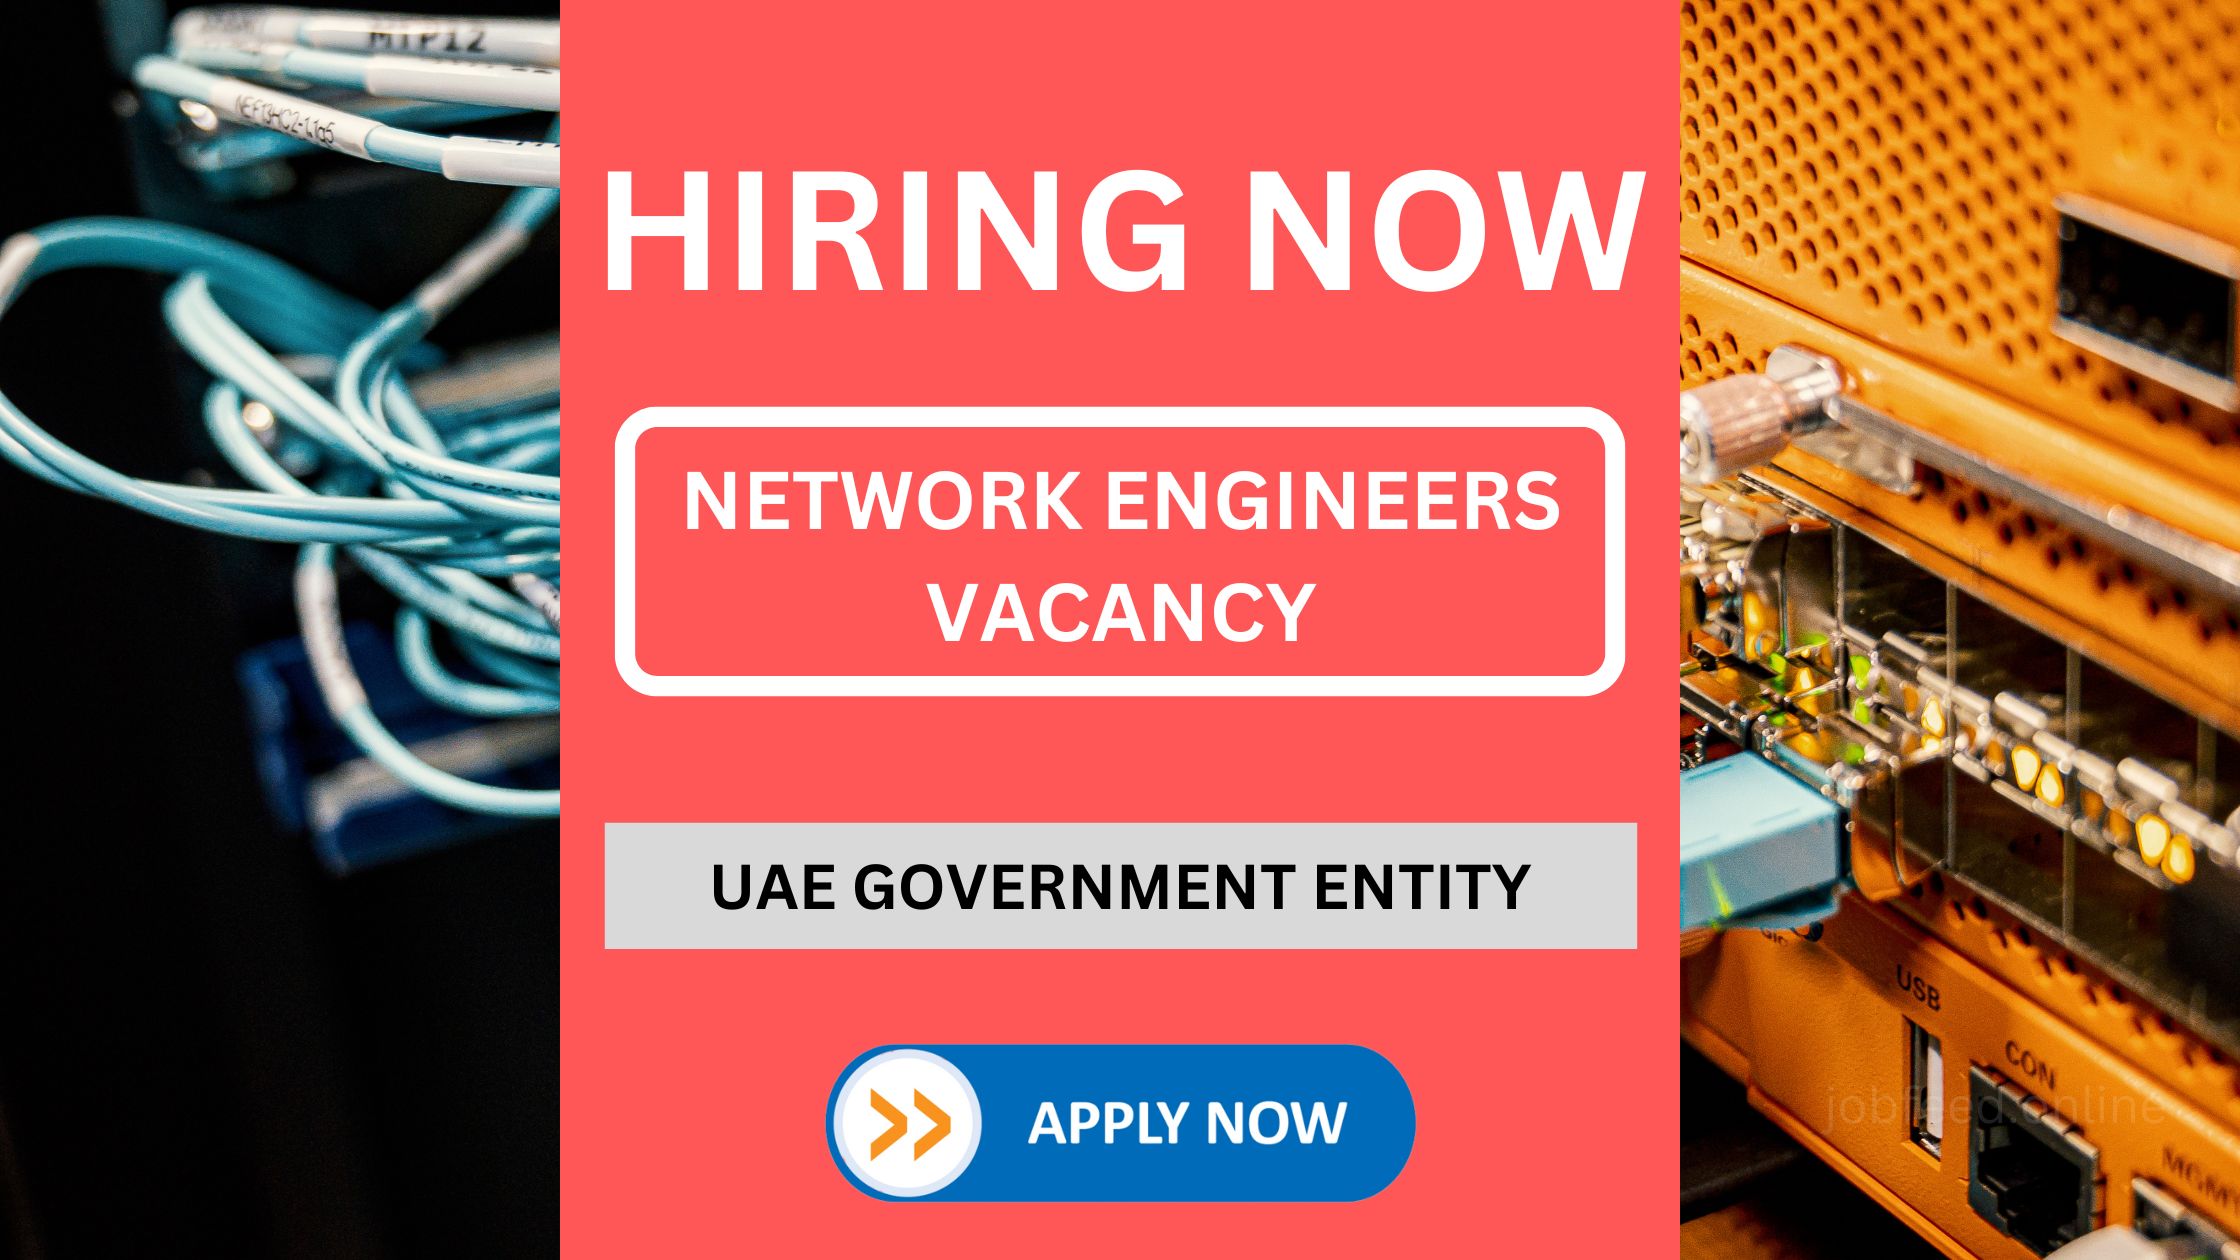 Network Engineers Vacancy - Hiring for UAE Government Entity